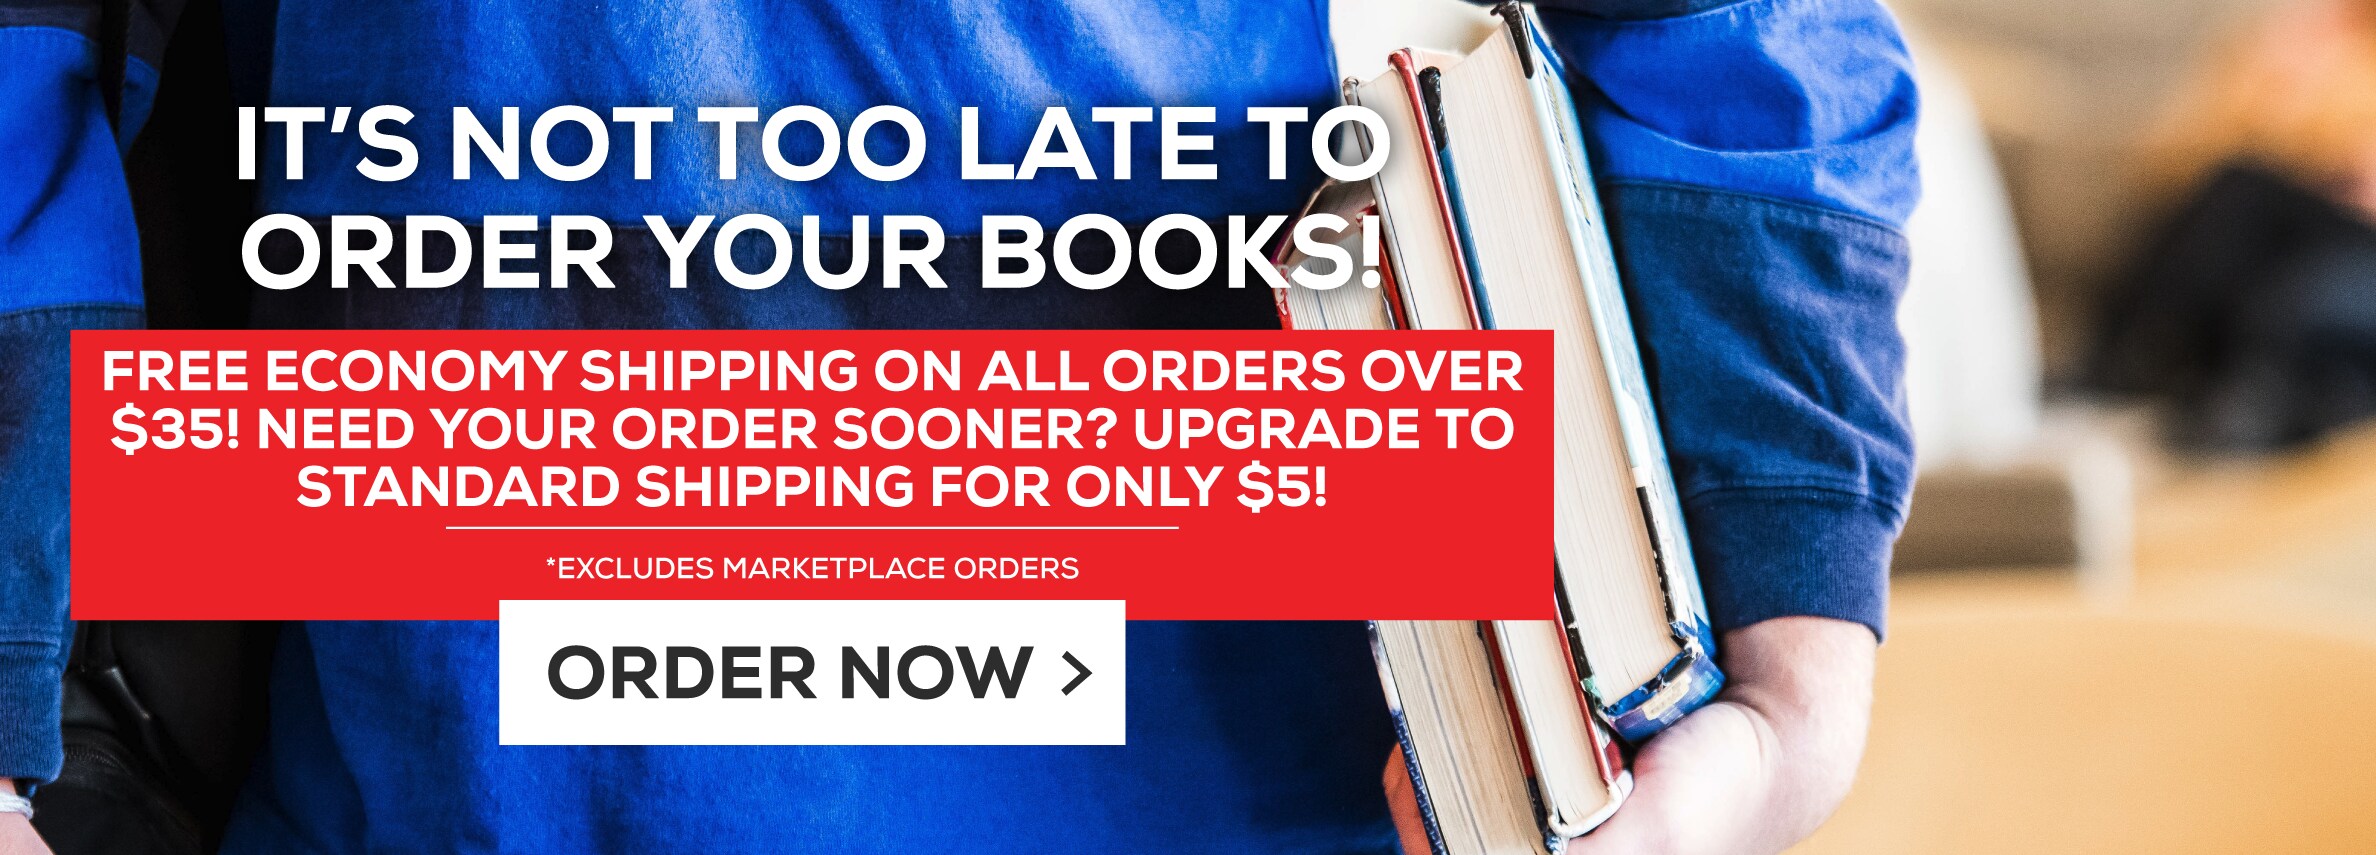 ItÃ¢â‚¬â„¢s not too late to order your books! Free economy shipping on all orders over $35! Need your order sooner? Upgrade to standard shipping for only $5! Excludes marketplace purchases. Order Now.